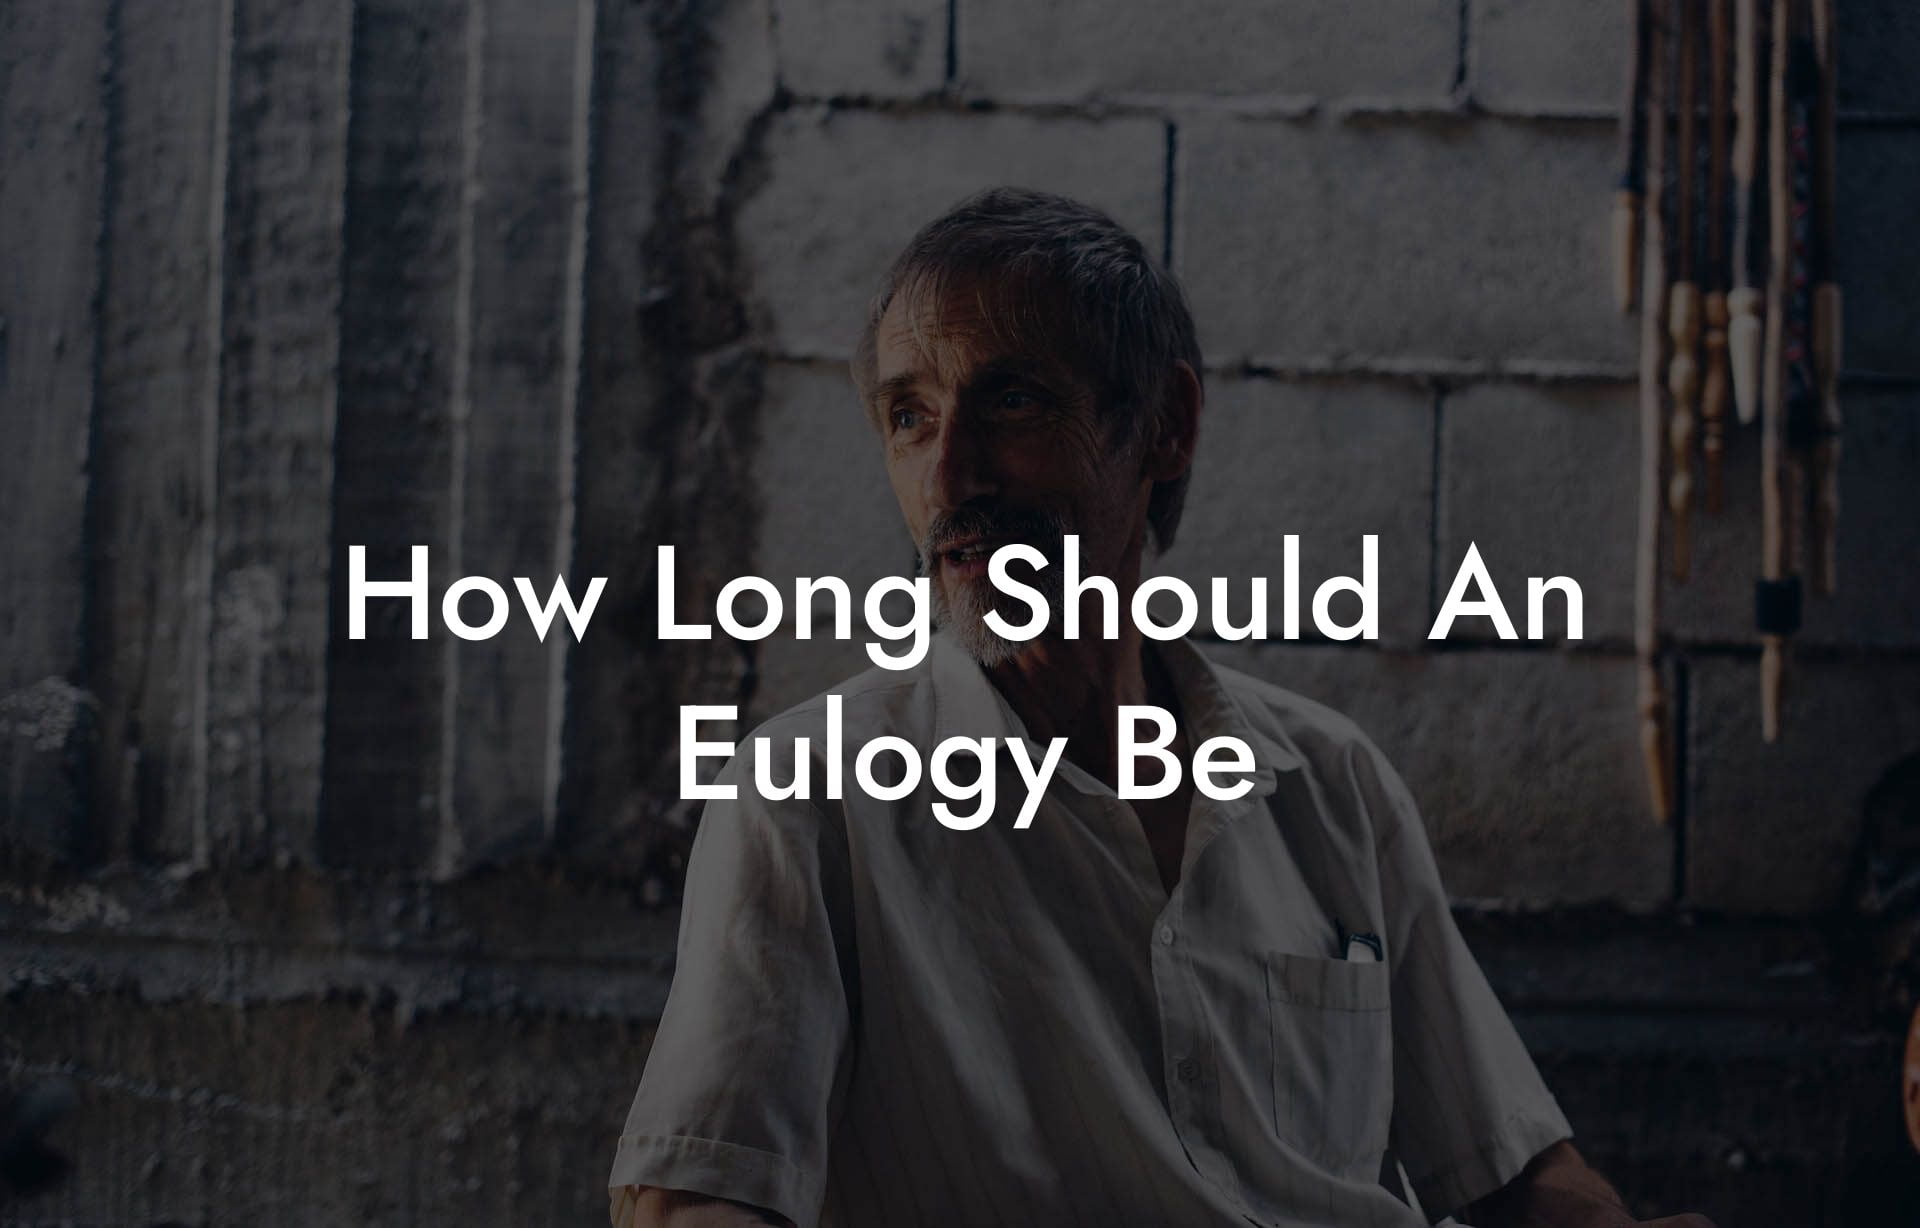 How Long Should An Eulogy Be?